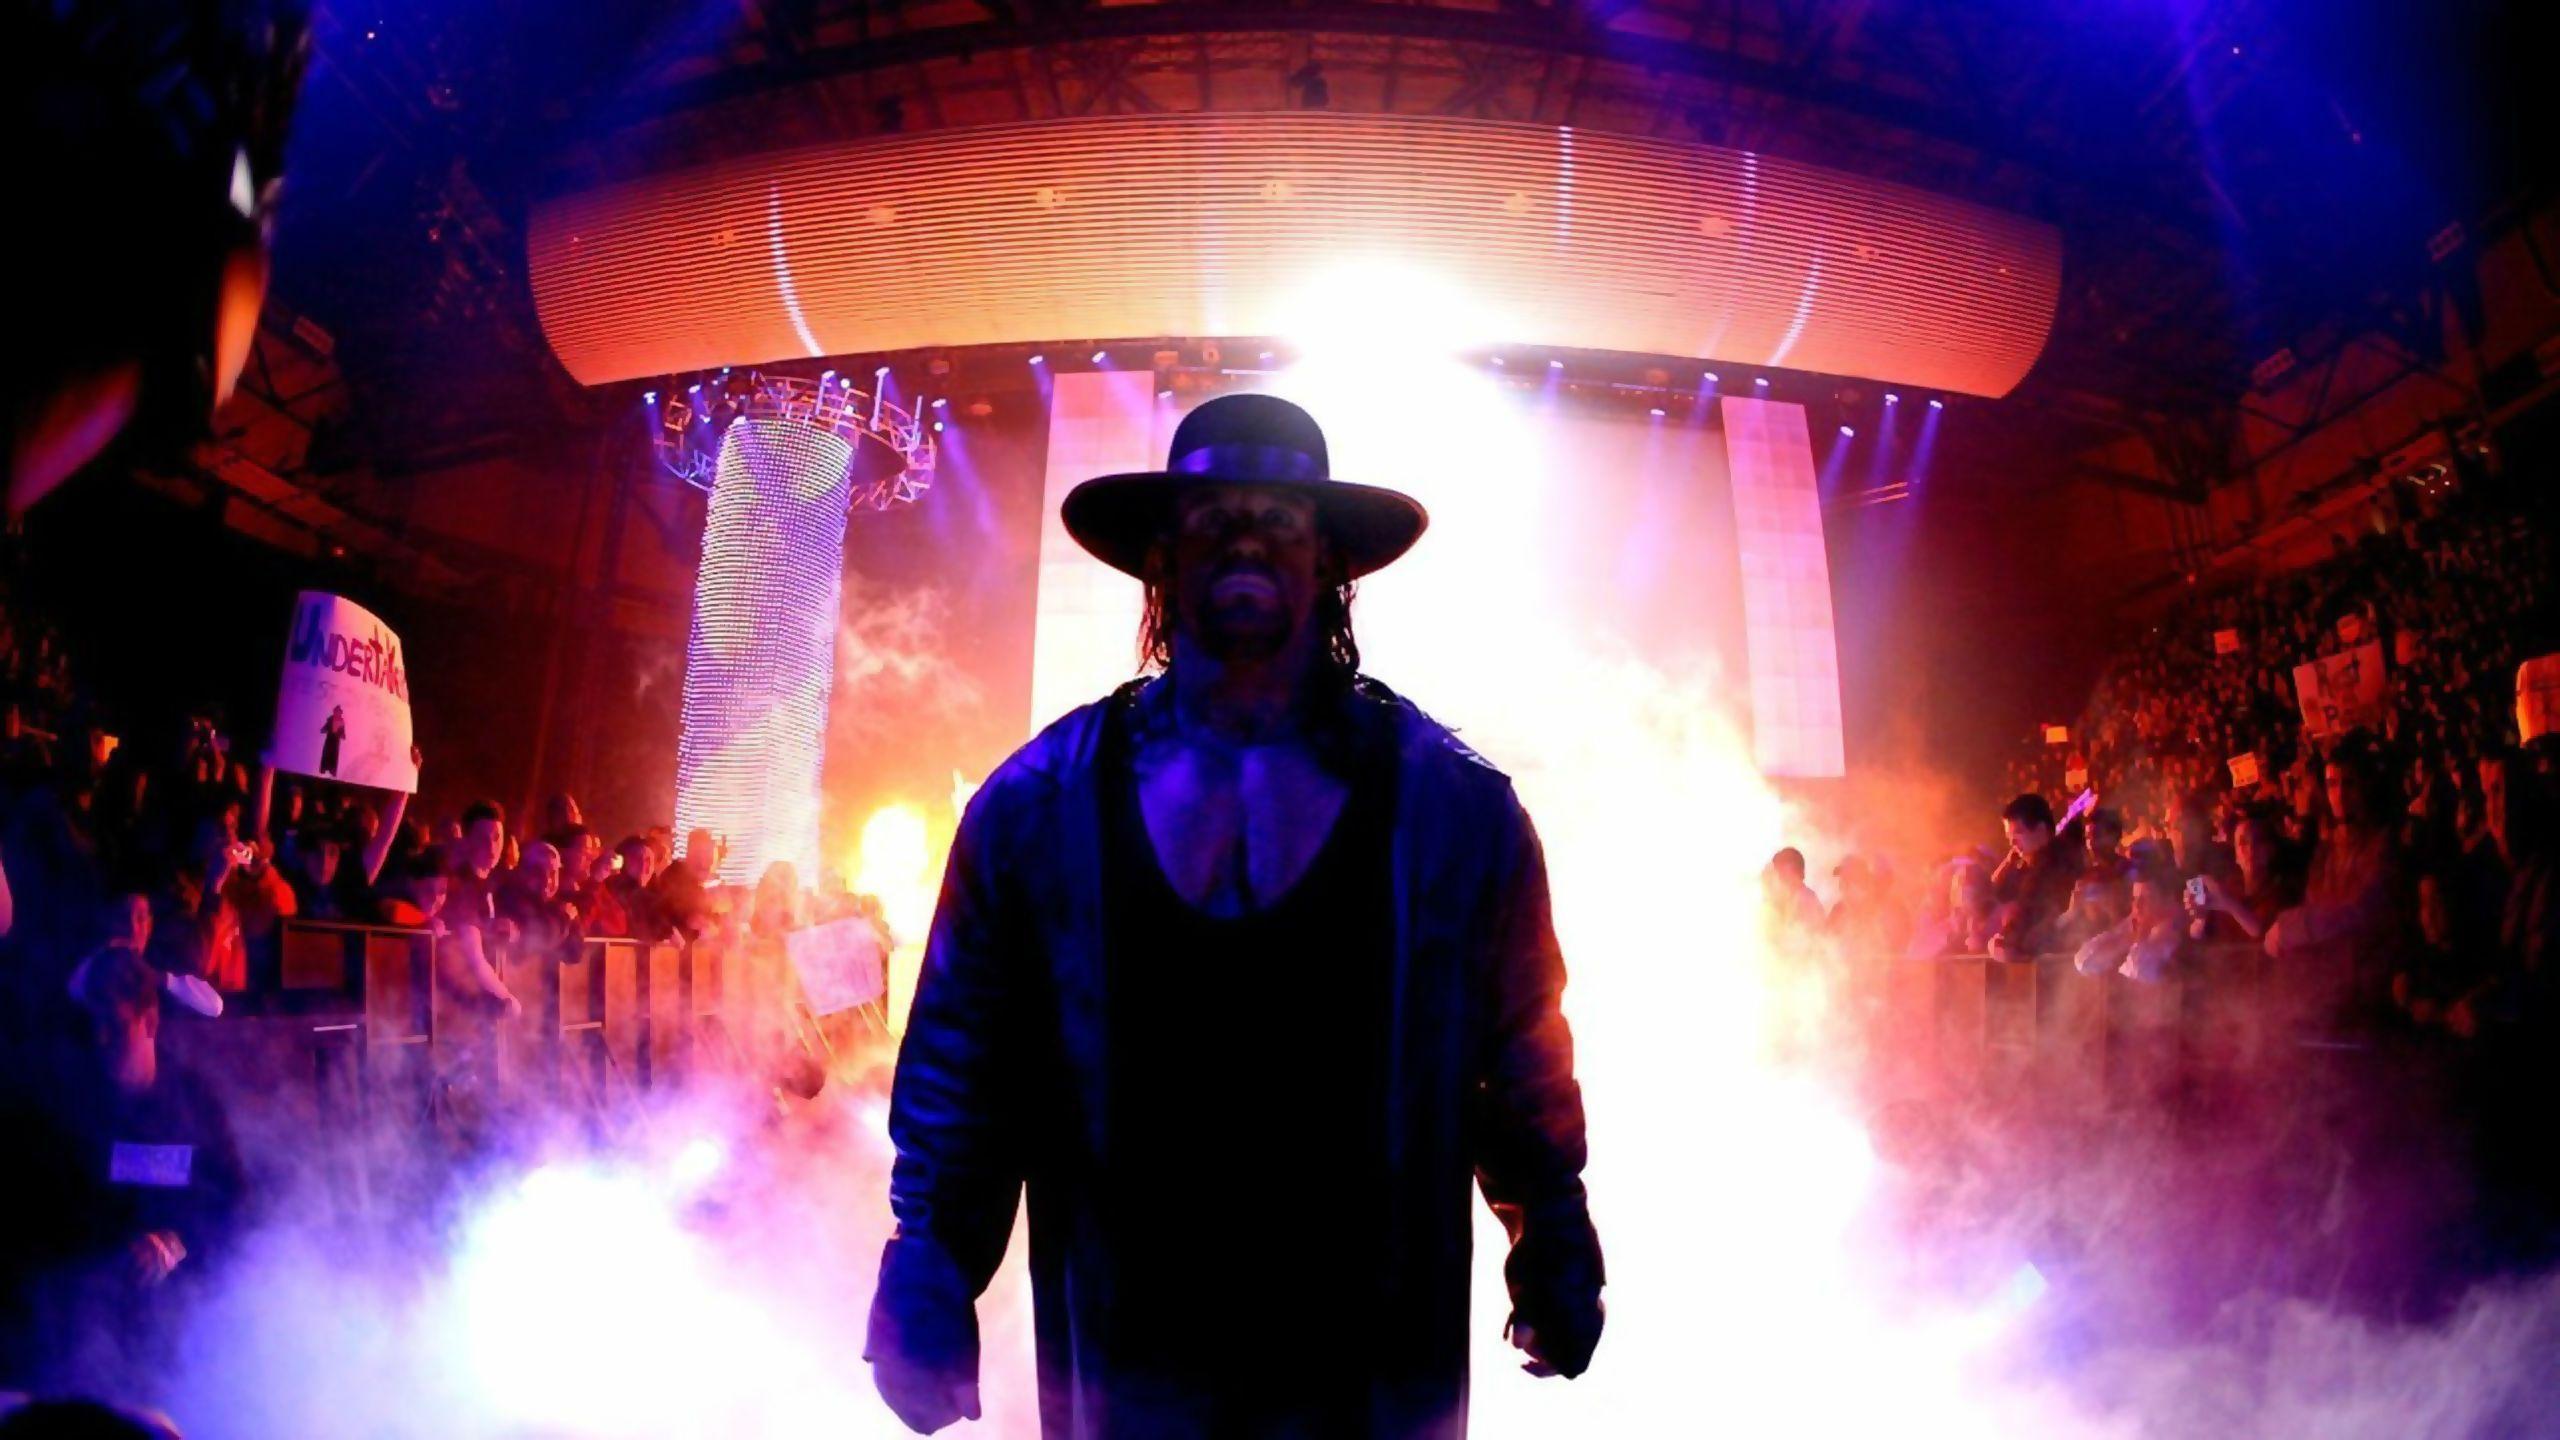 Entry of The Undertaker HD Wallpaper